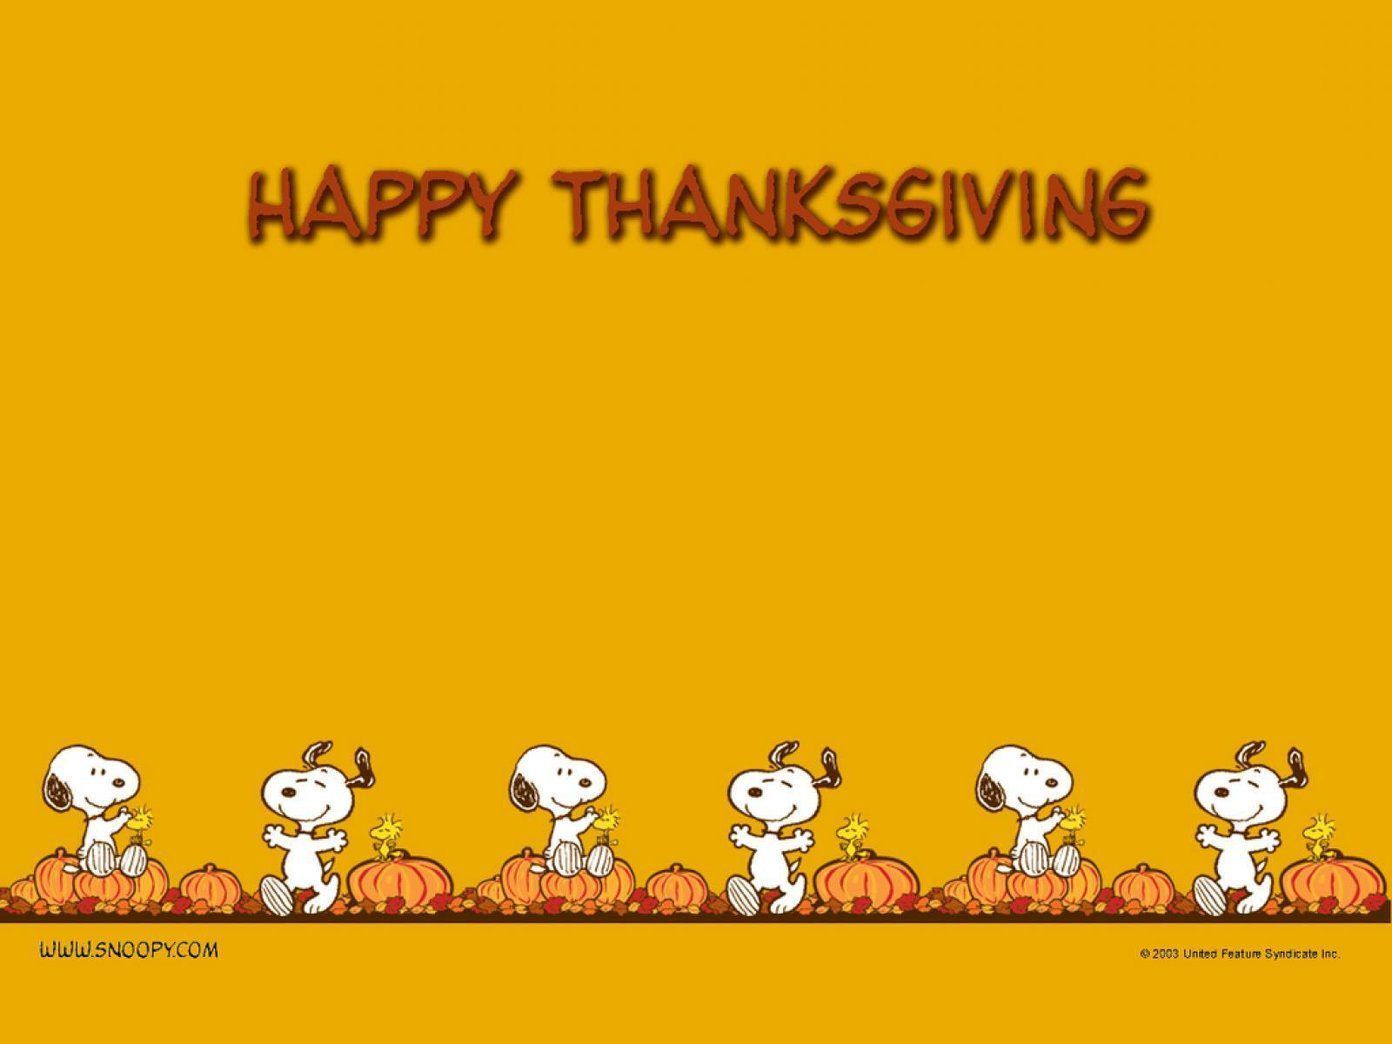 Snoopy Thanksgiving wallpaper with Charlie Brown and Woodstock in front of pumpkins. - Thanksgiving